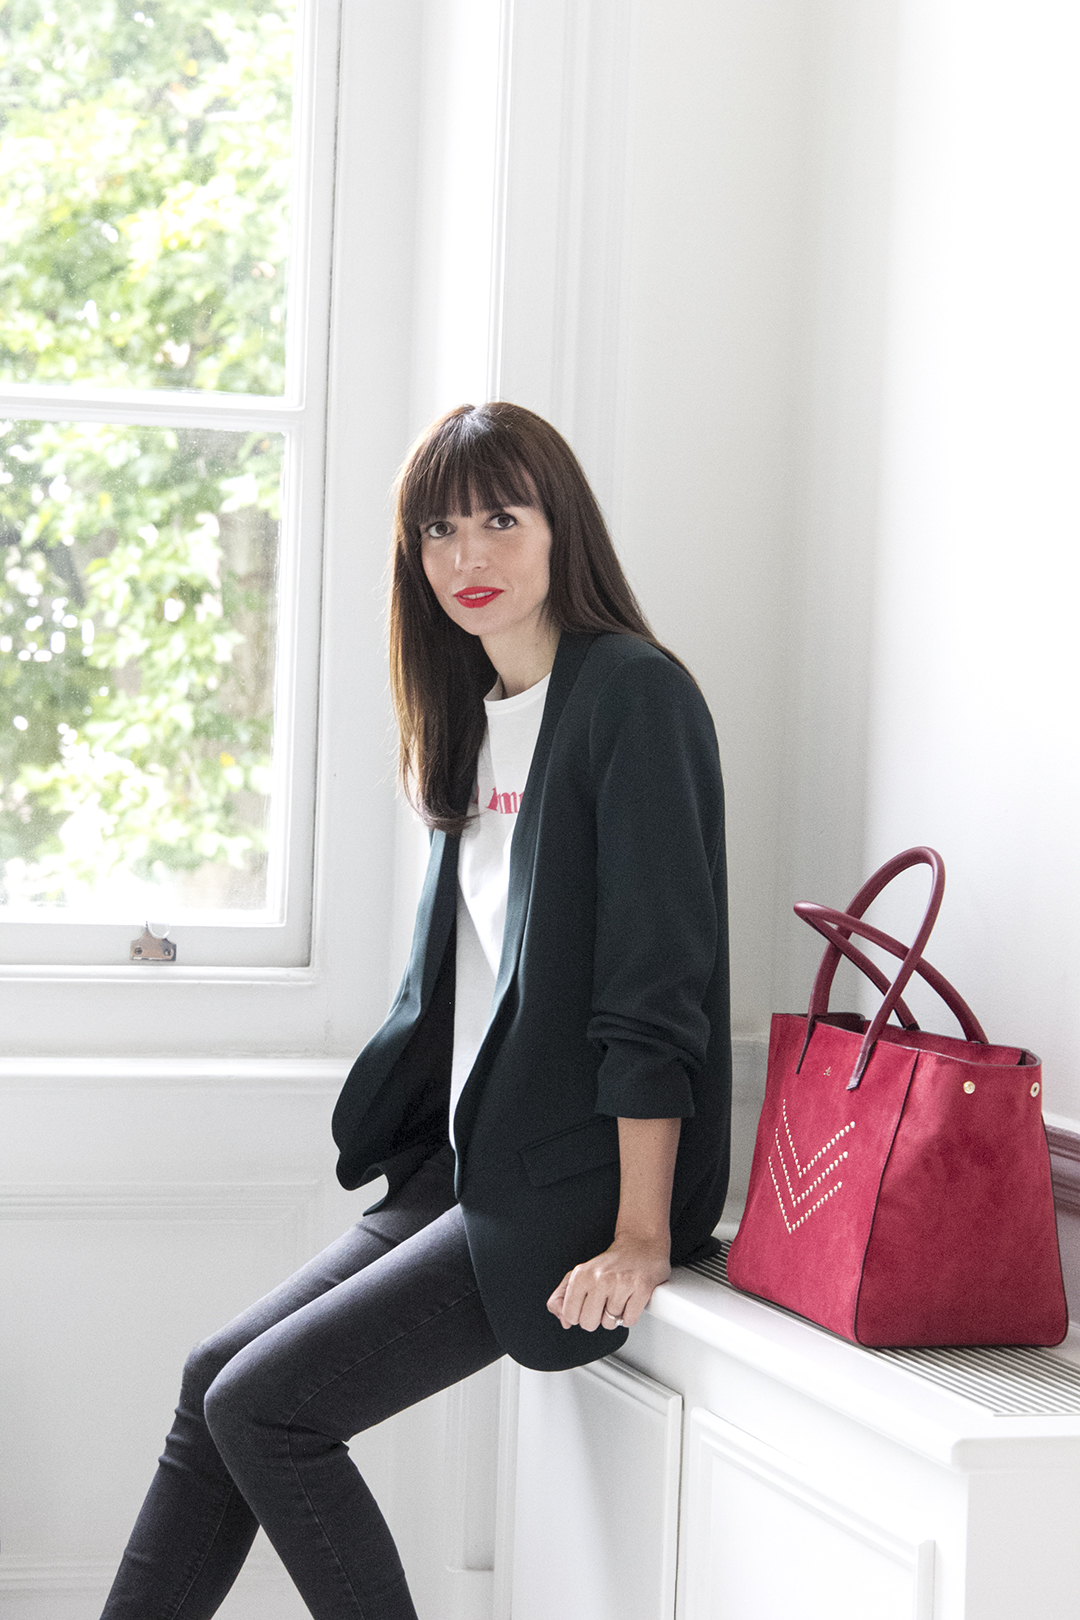 DeMellier Founder, Mireia Llusia, Lindh on rebranding her business